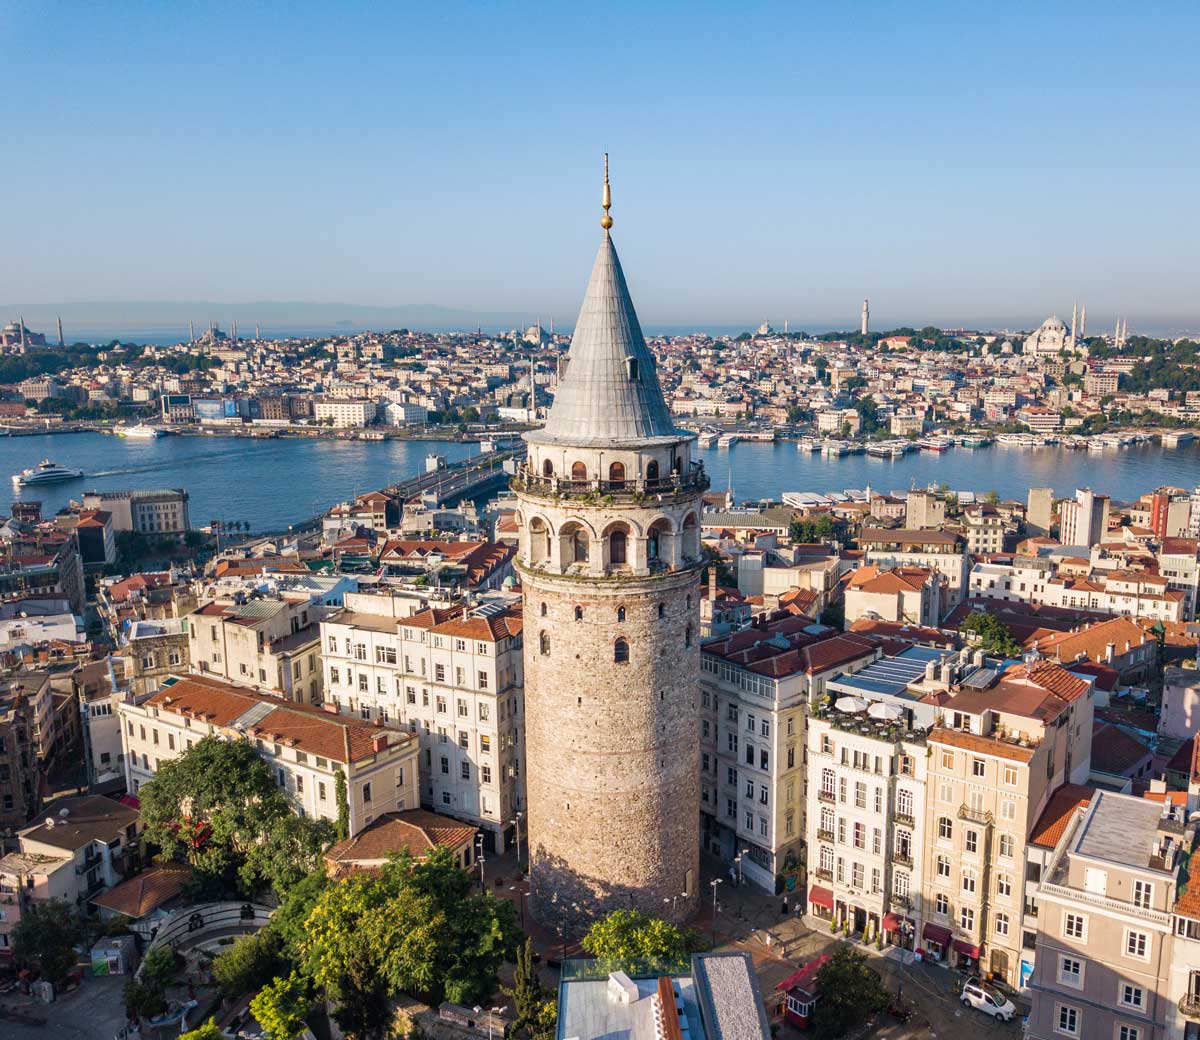 Historical view of Galata Tower